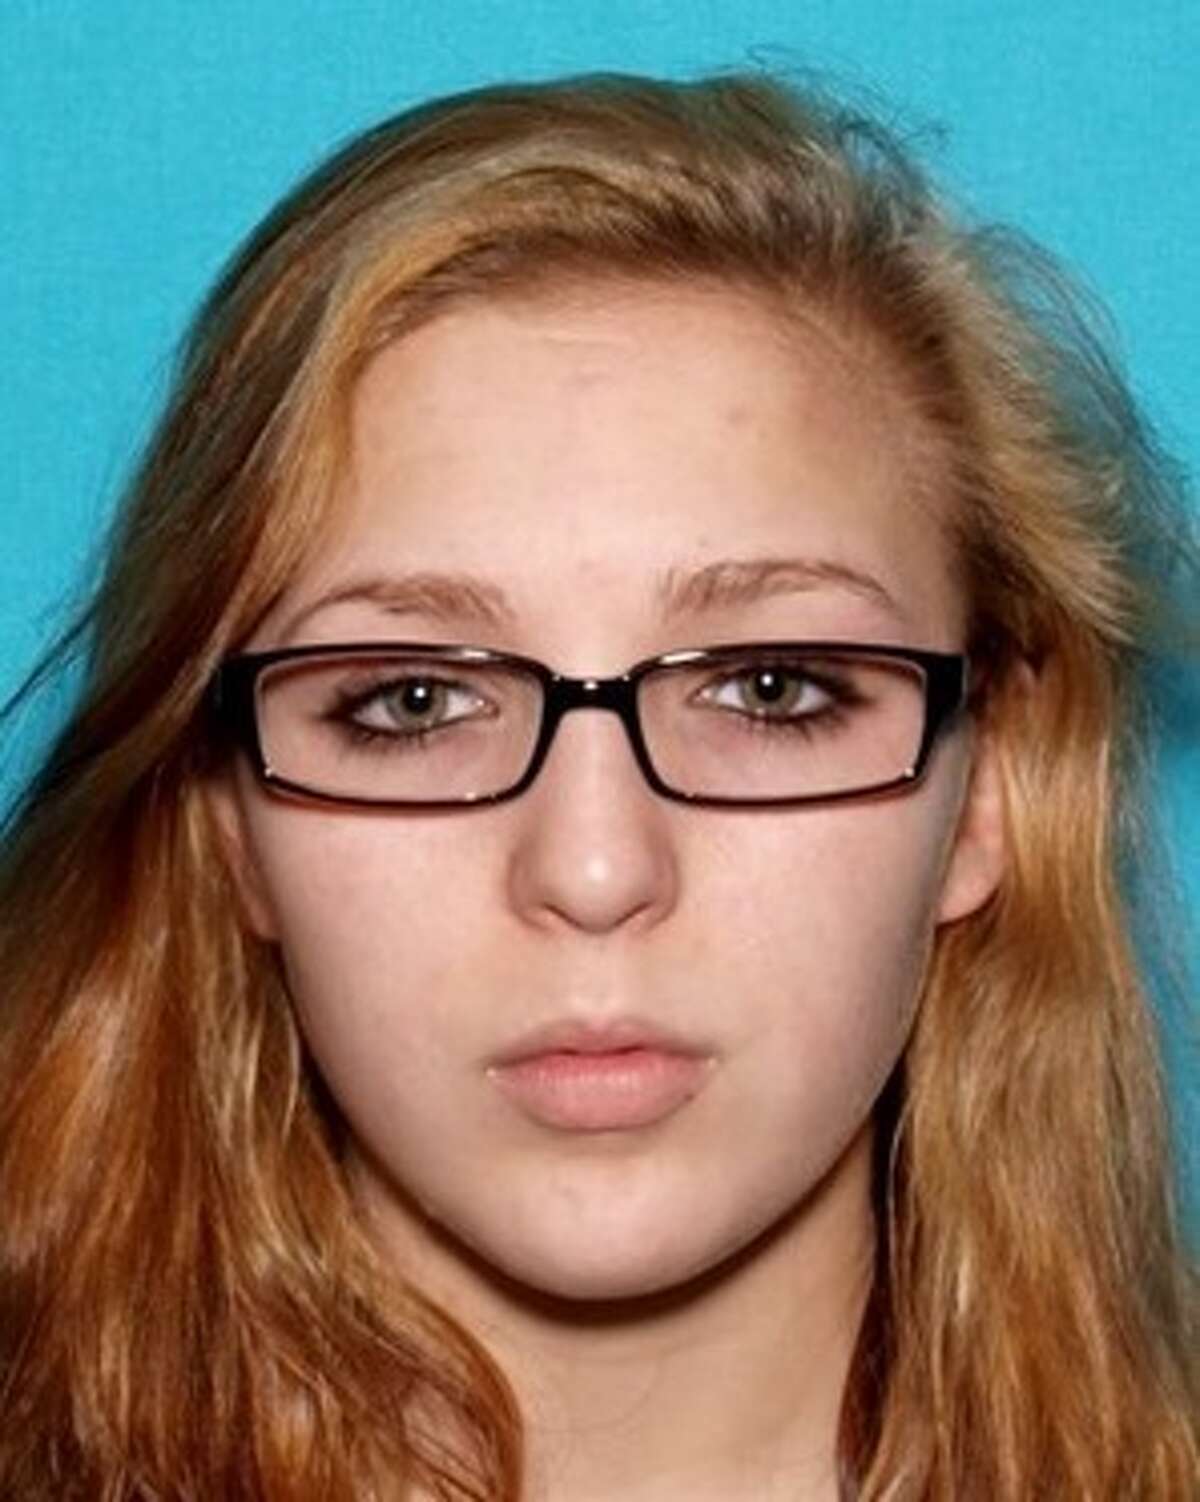 Elizabeth Thomas, 15, was last seen in Columbia, Tennessee on March 13, 2017.